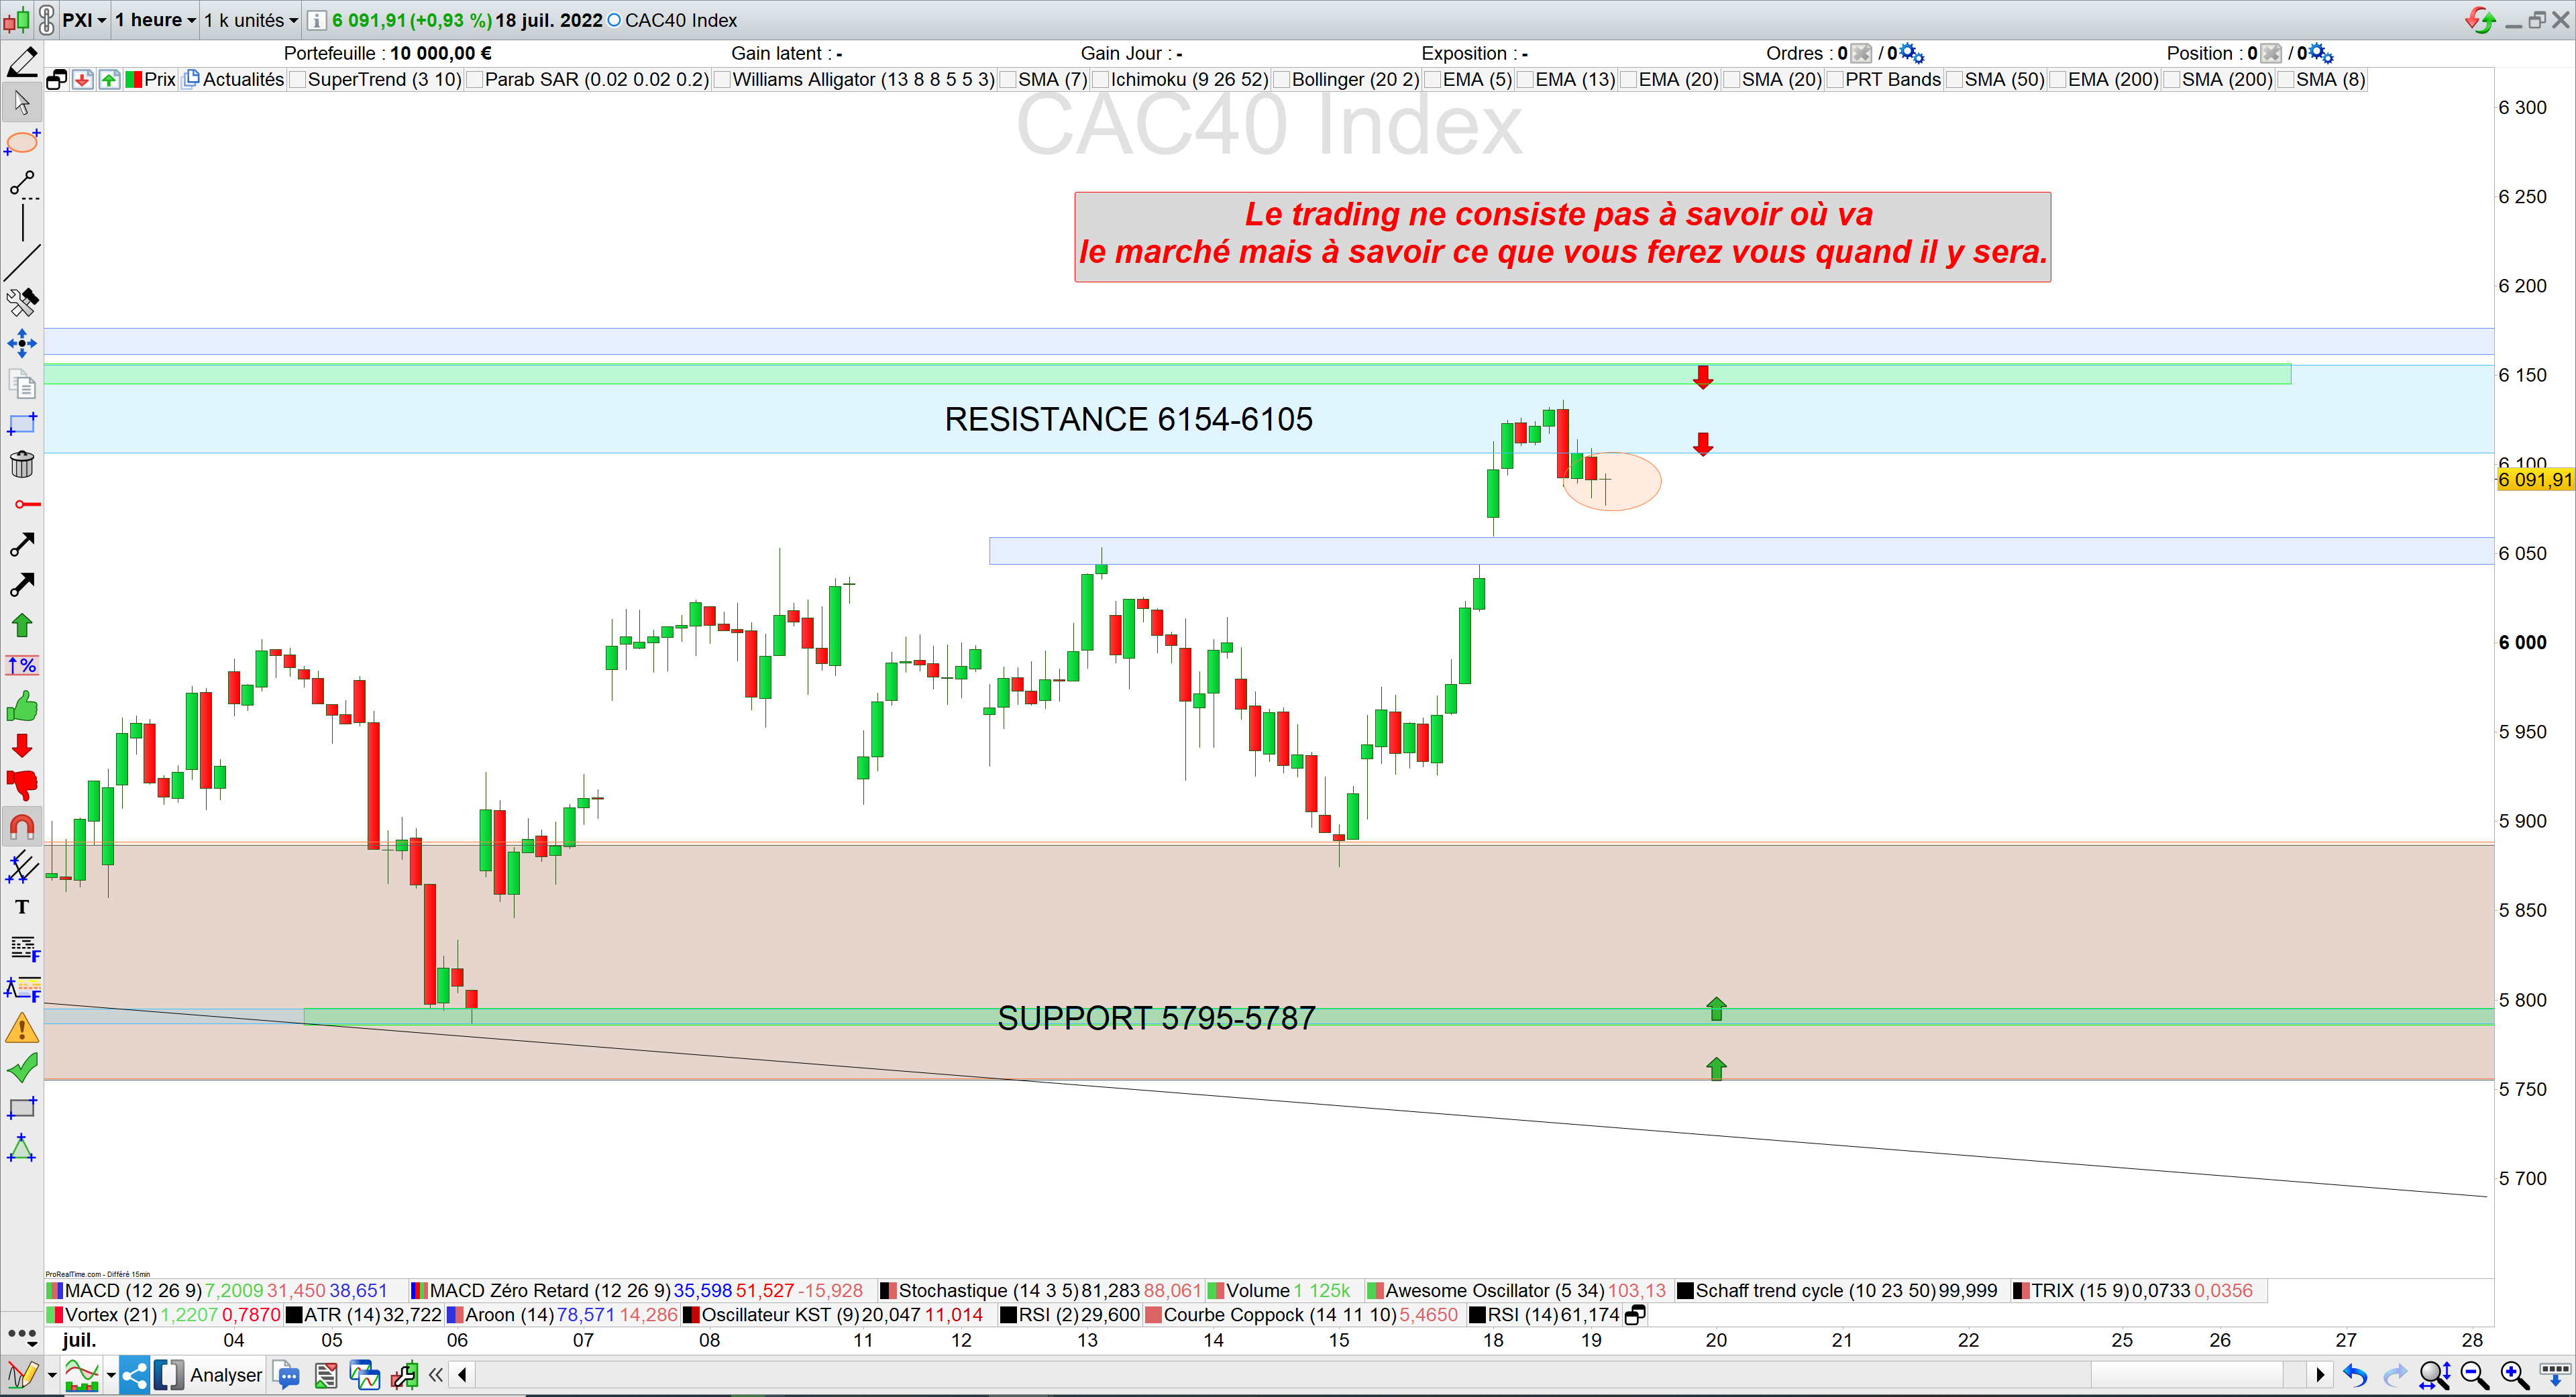 Trading cac40 19/07/22